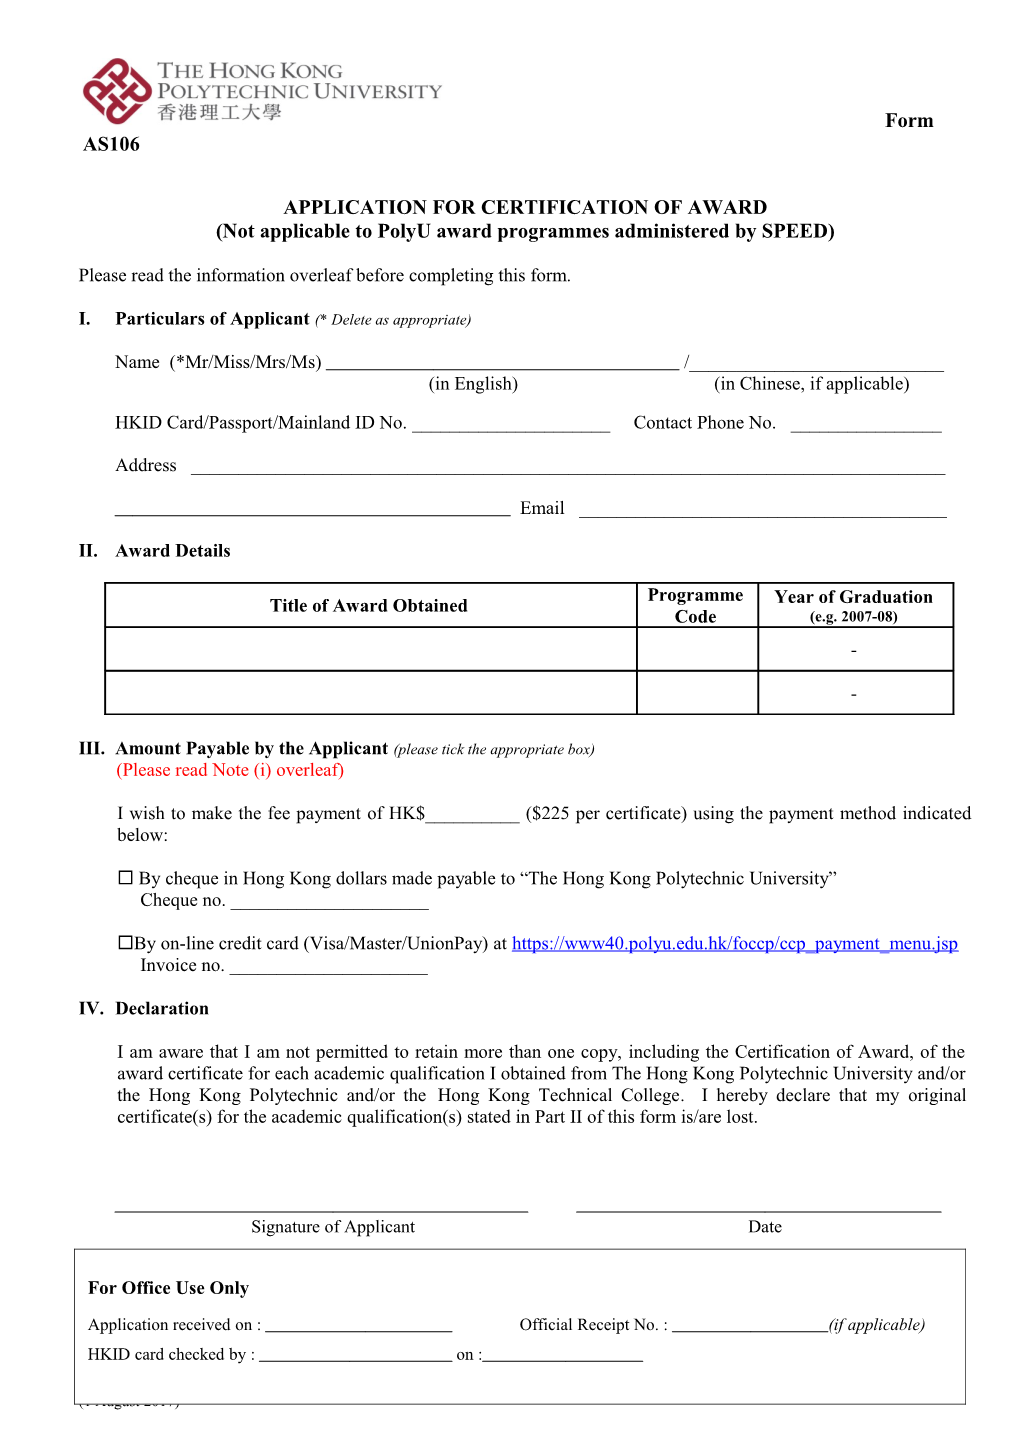 Application for Certification of Award